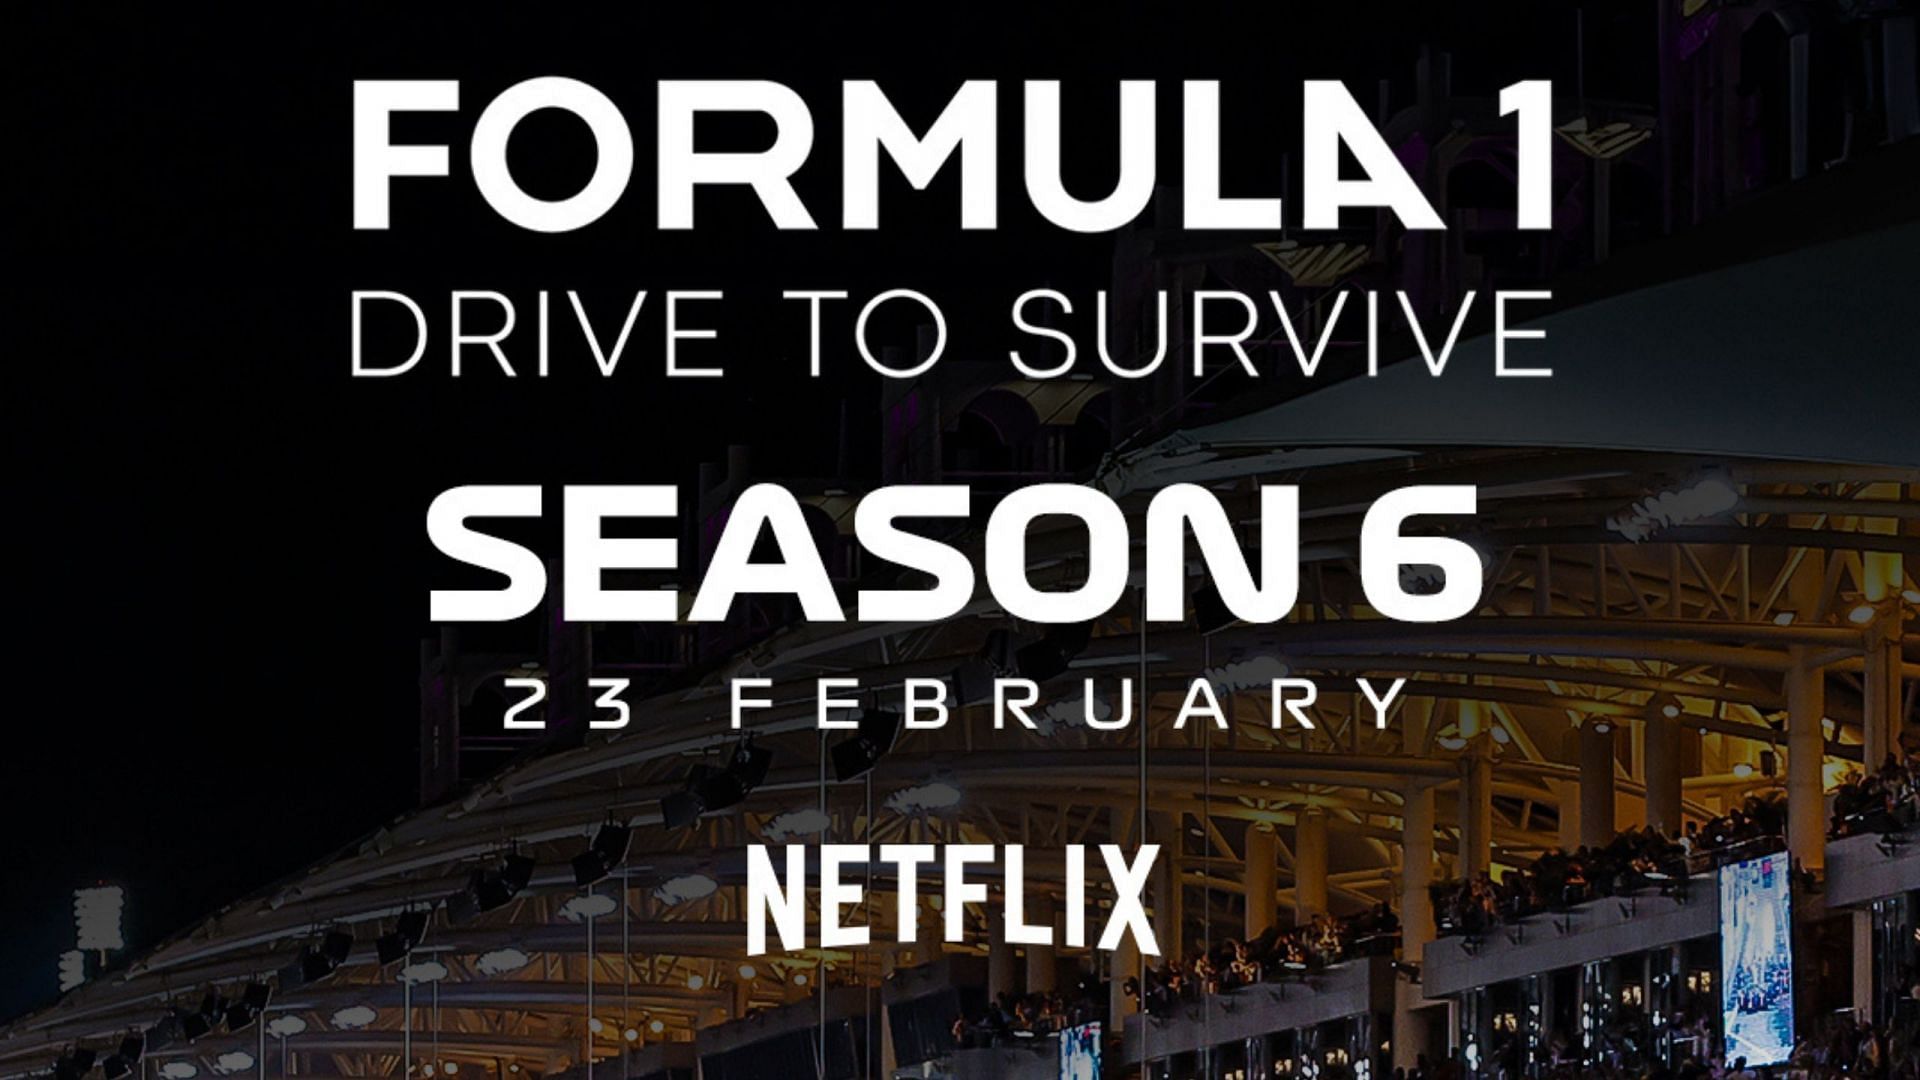 Drive to Survive season 6 will be released in February